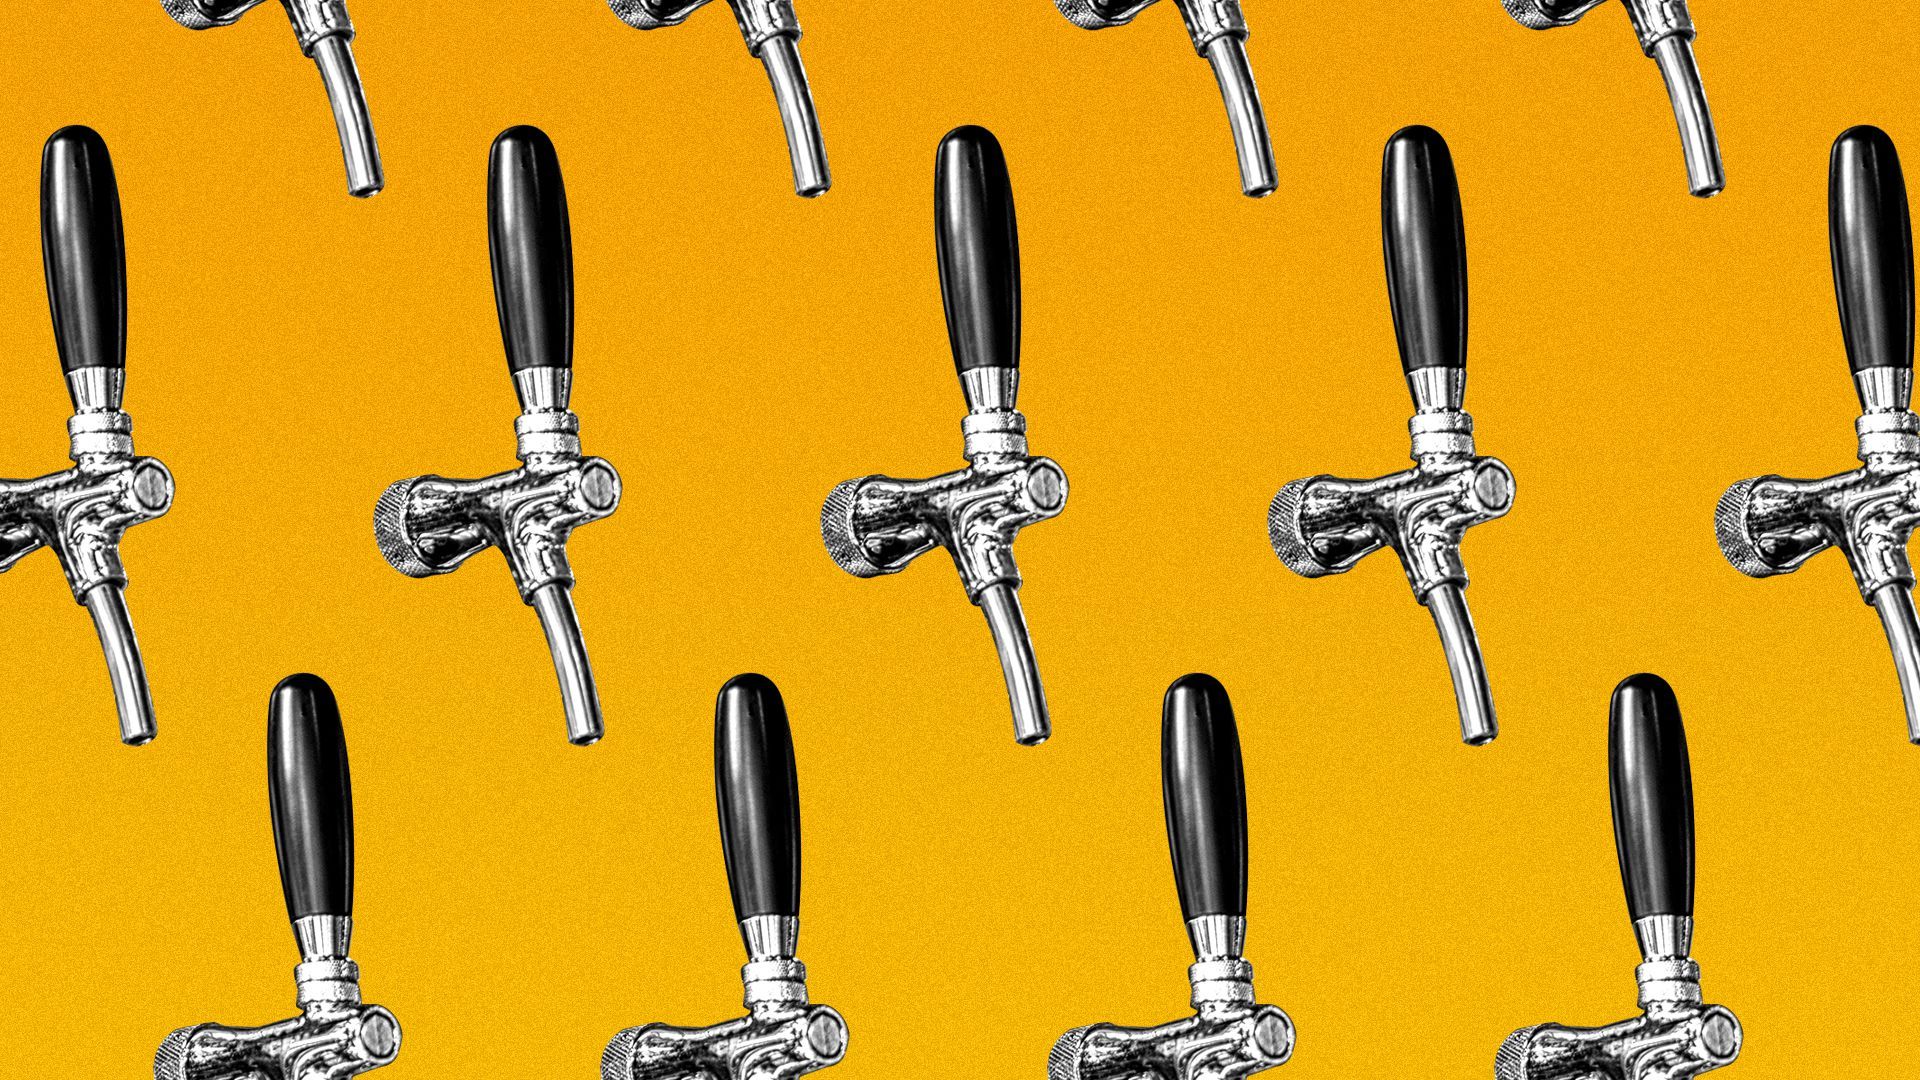 Illustration of a pattern of beer taps